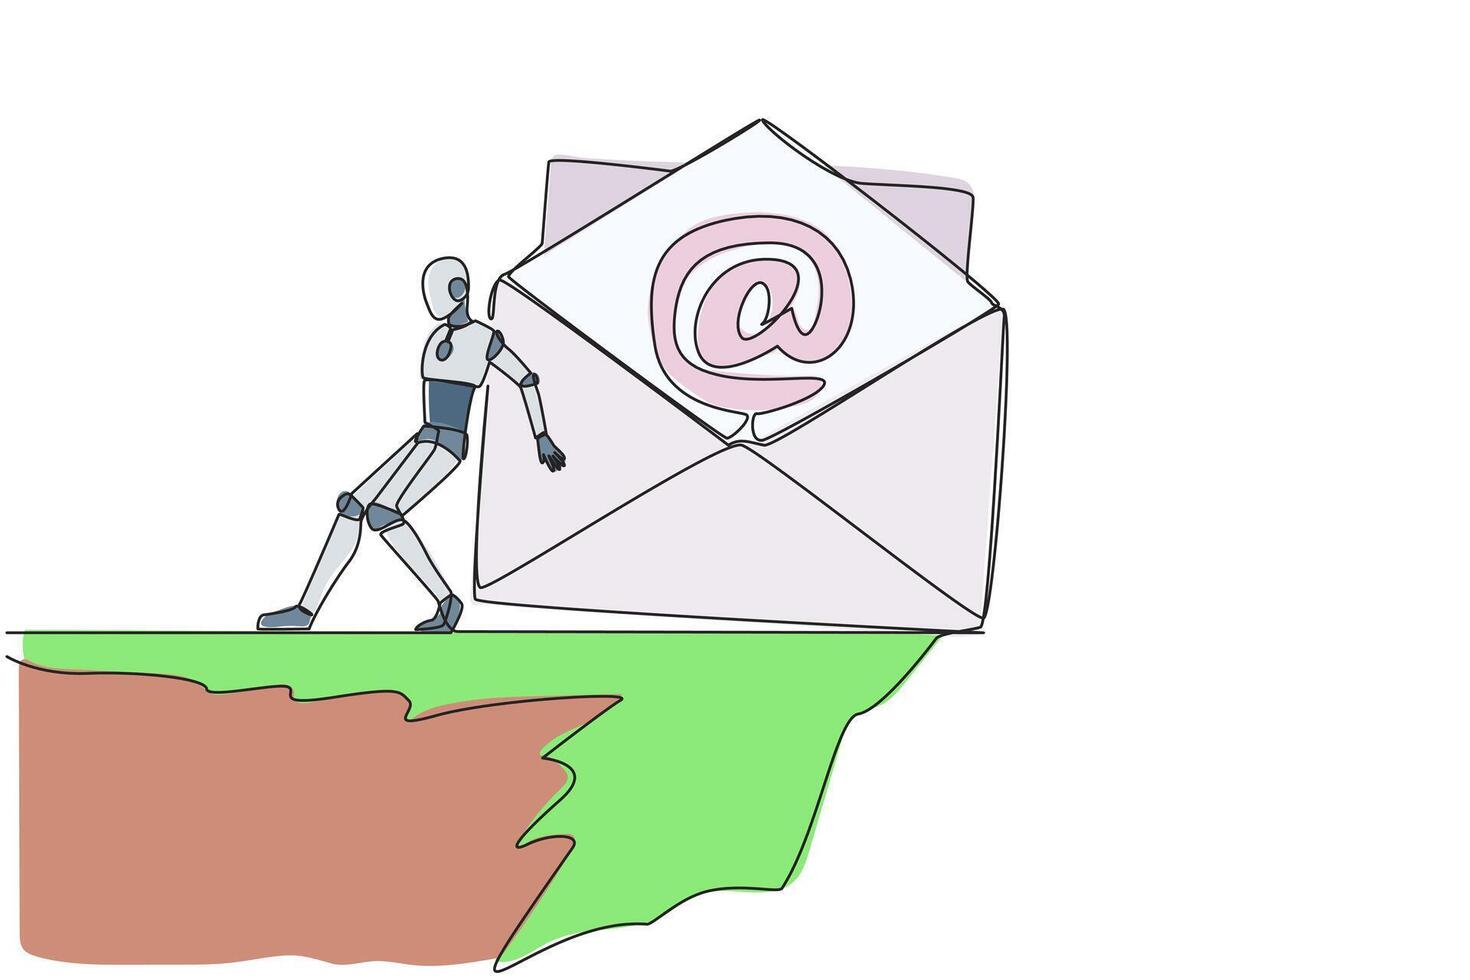 Continuous one line drawing robot pushes a large email icon down with its back from the edge of cliff. Throw away spam emails to the bottom of steep cliff. Single line draw design vector illustration